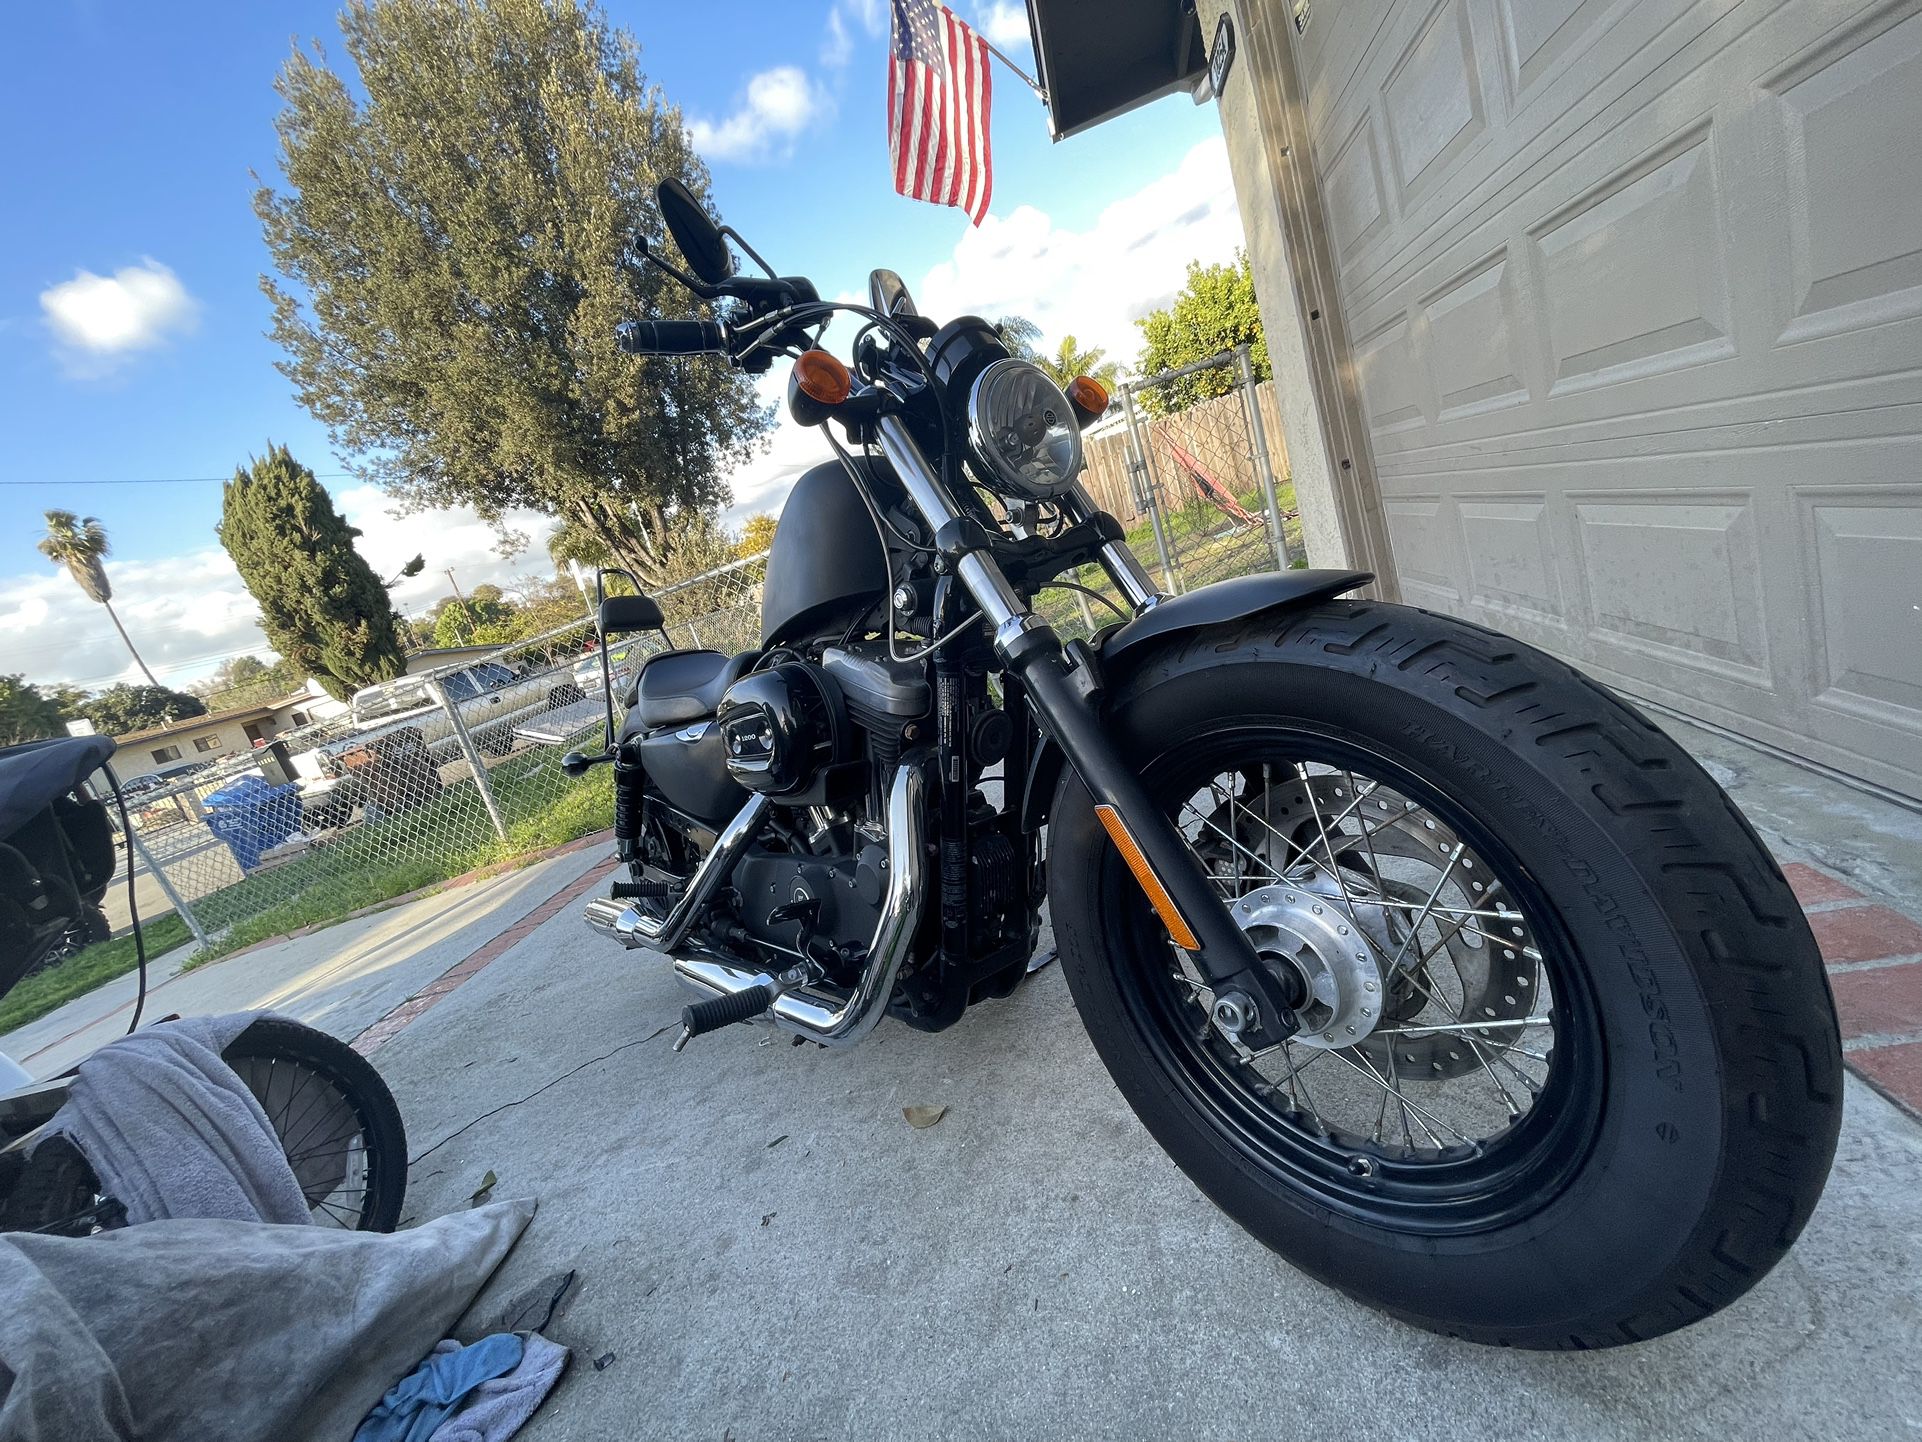 2014 Harley forty eight XL1200 sportster XL 1200 forty eight sportster